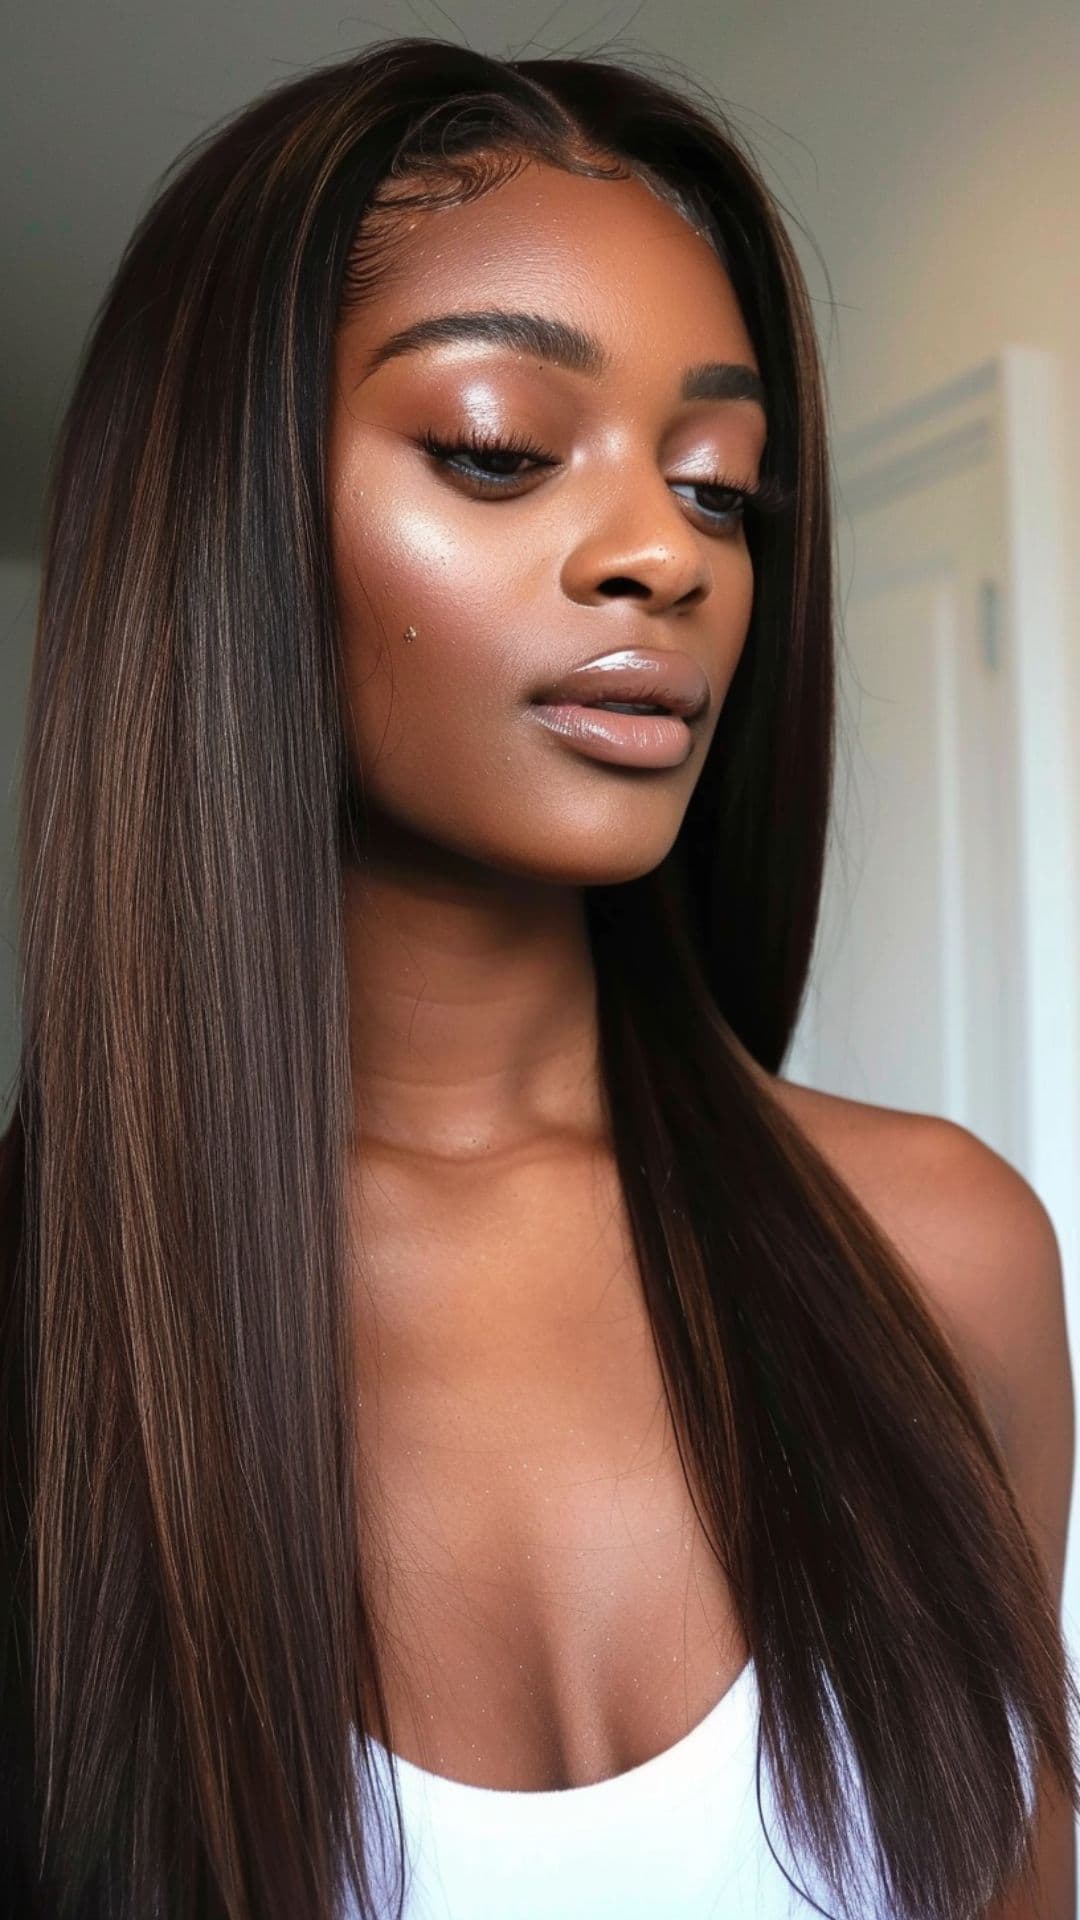 A black woman modelling a straight chocolate brown hair.